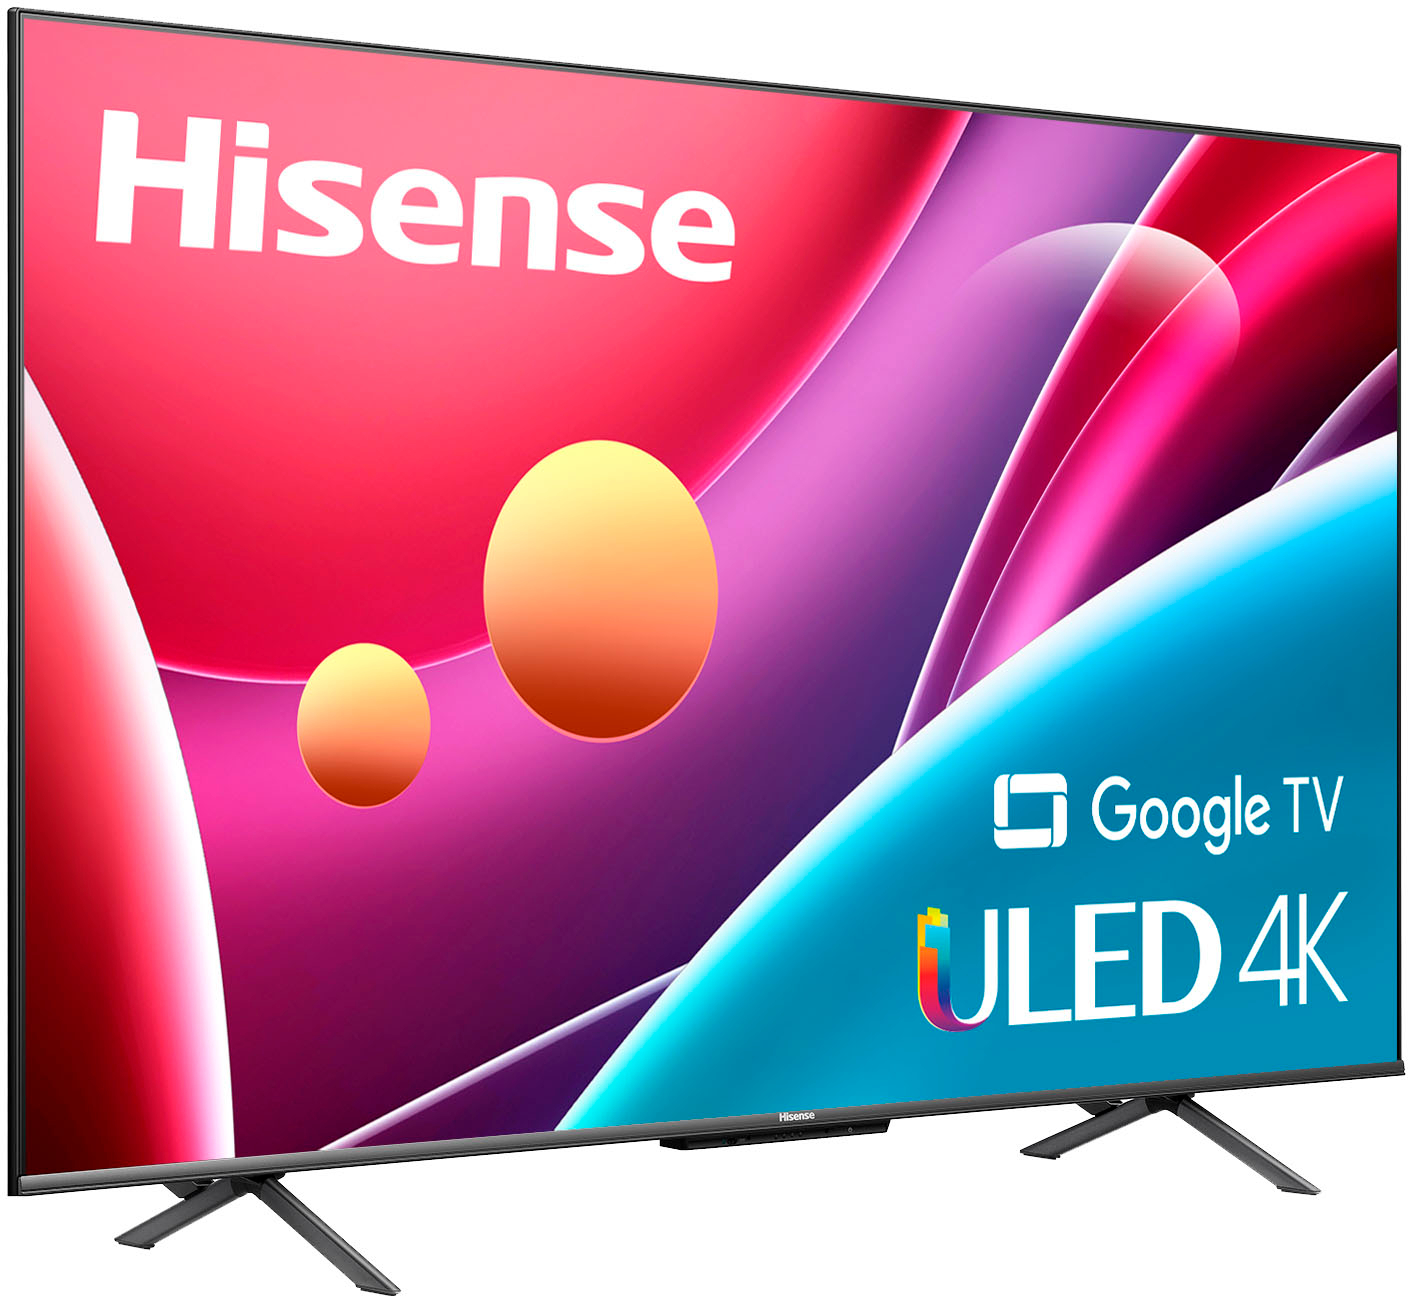 Best Hisense TV In India: Reviews And Smart Features